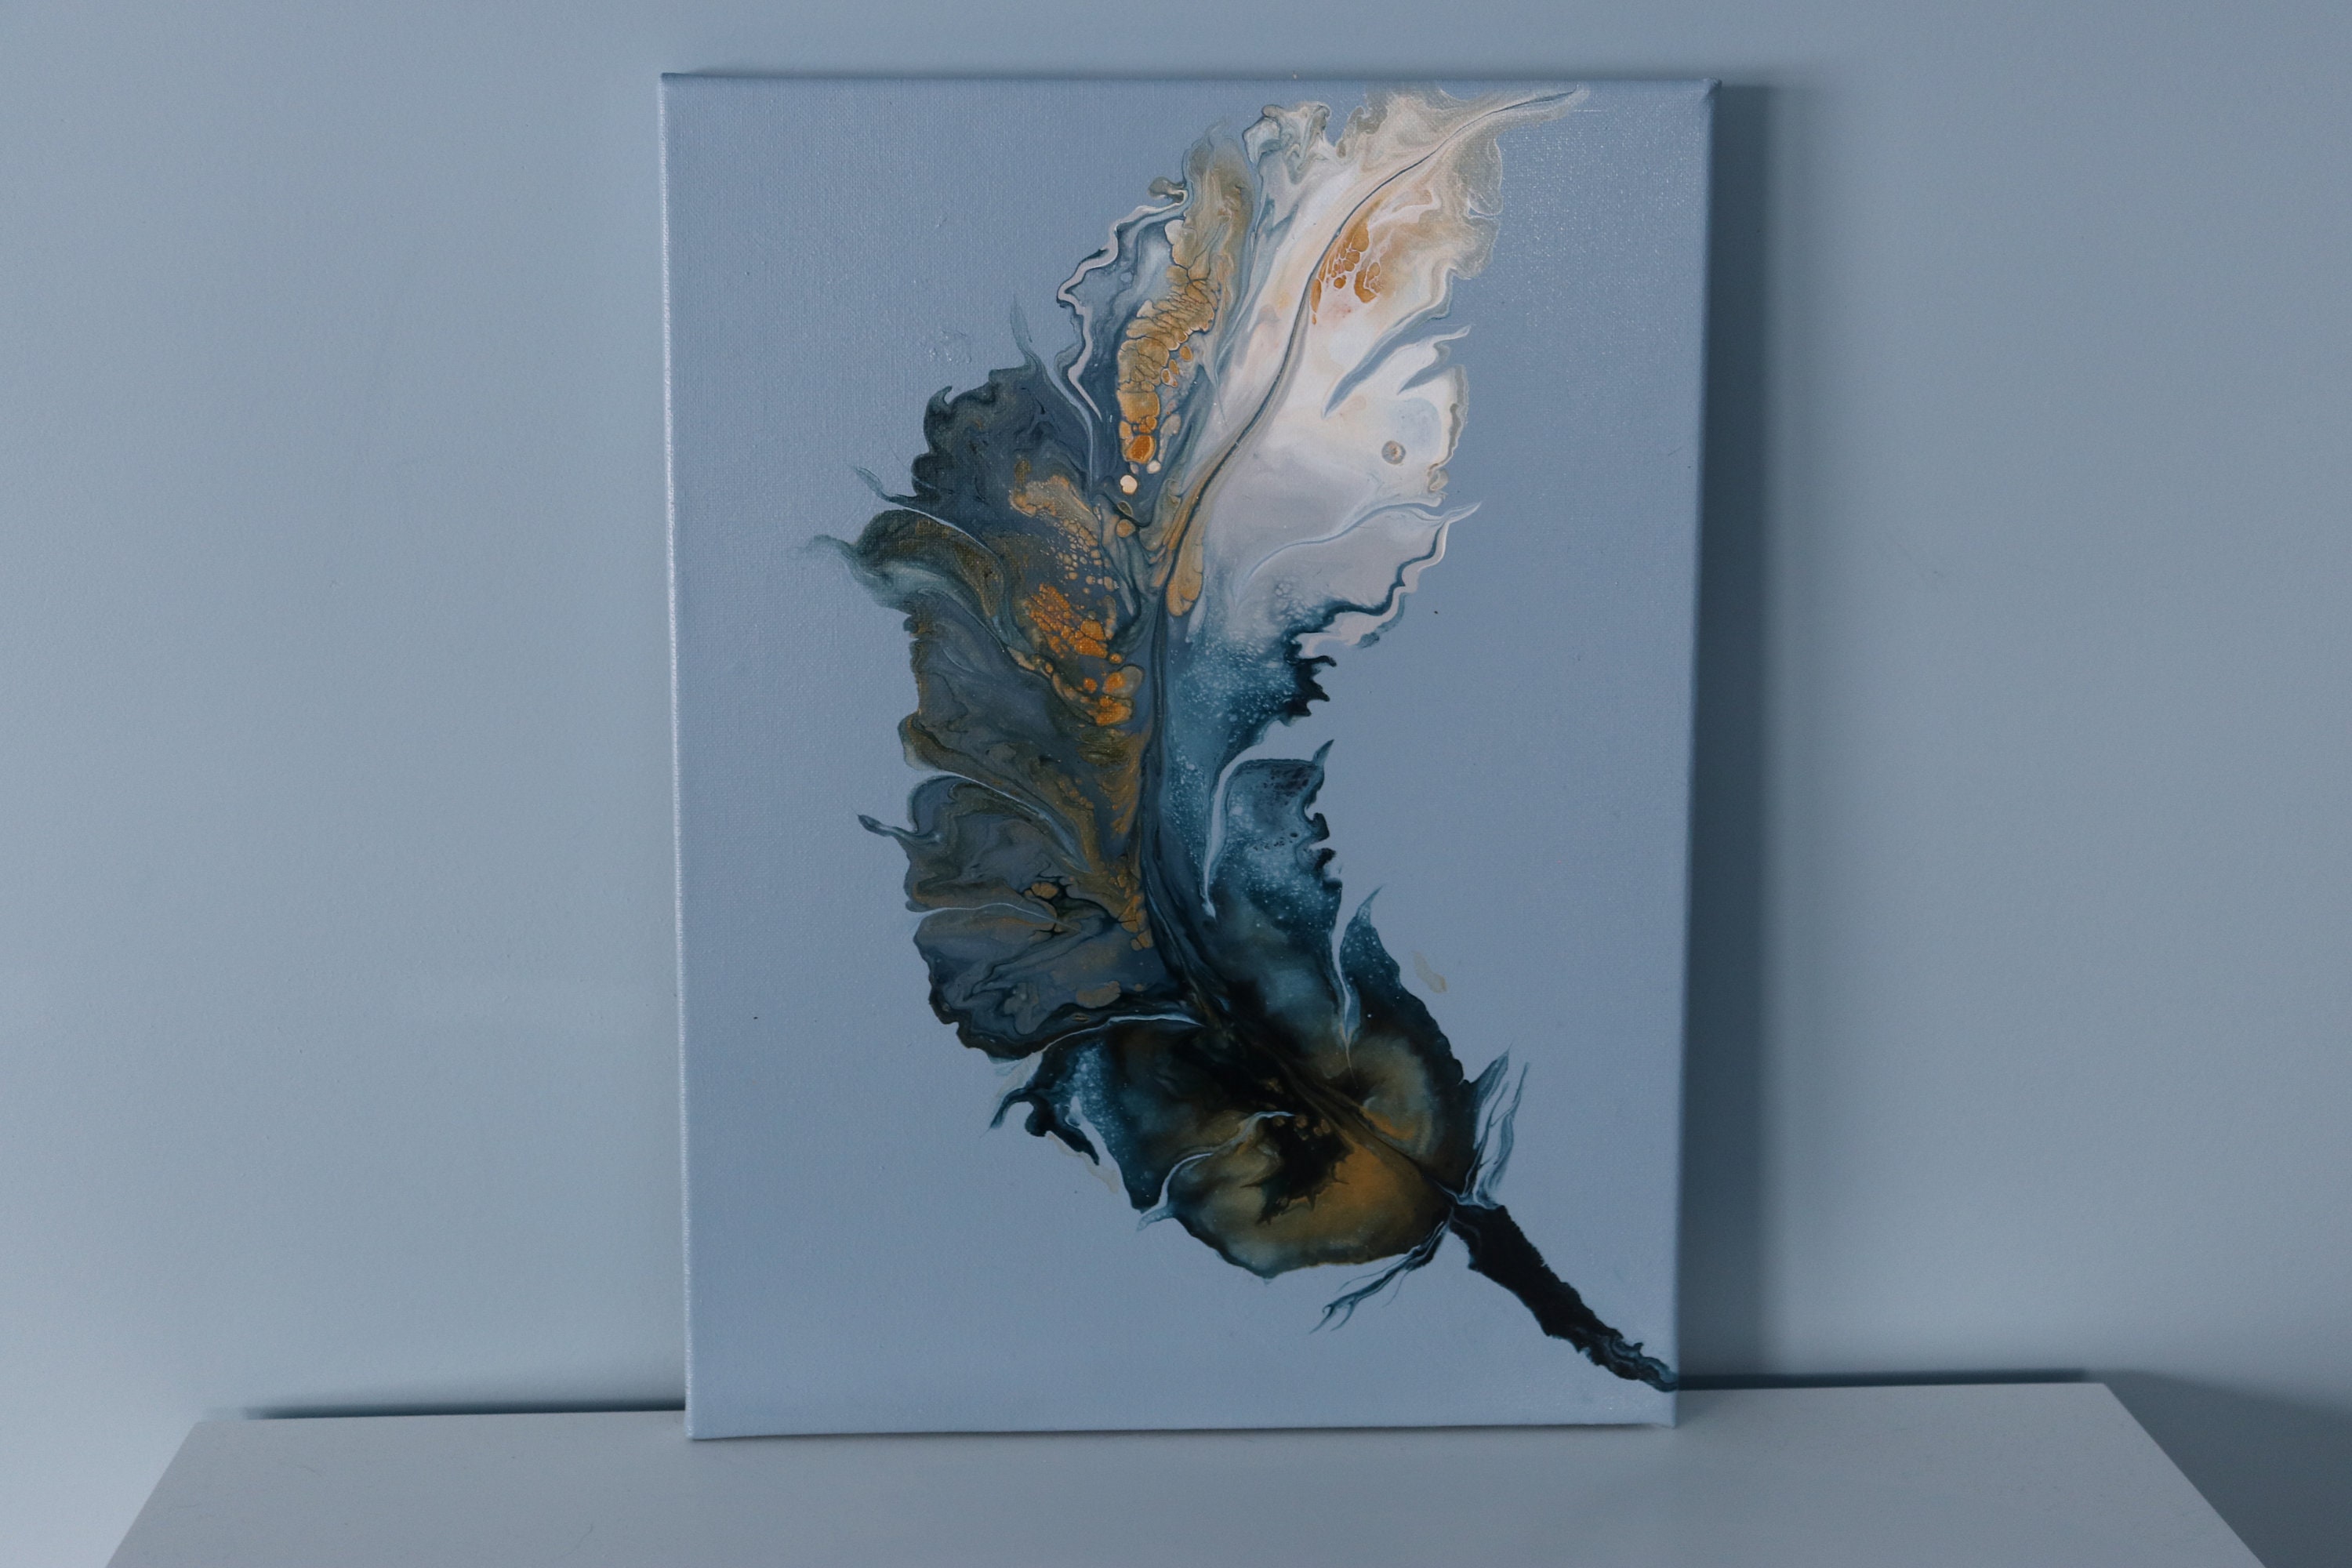 Blue and Gold Feathers Abstract Original Acrylic Pour Painting, 8 x 10,  Fluid Art Painting